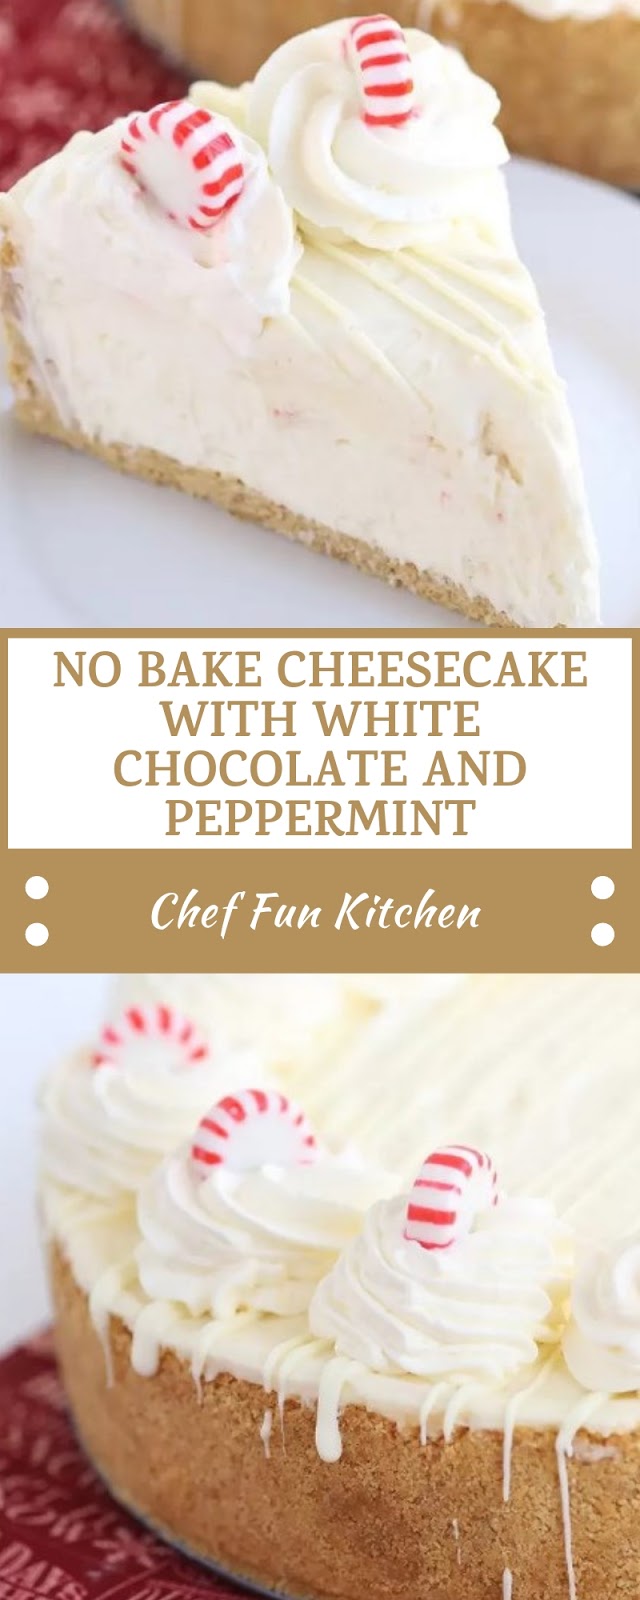 NO BAKE CHEESECAKE WITH WHITE CHOCOLATE AND PEPPERMINT